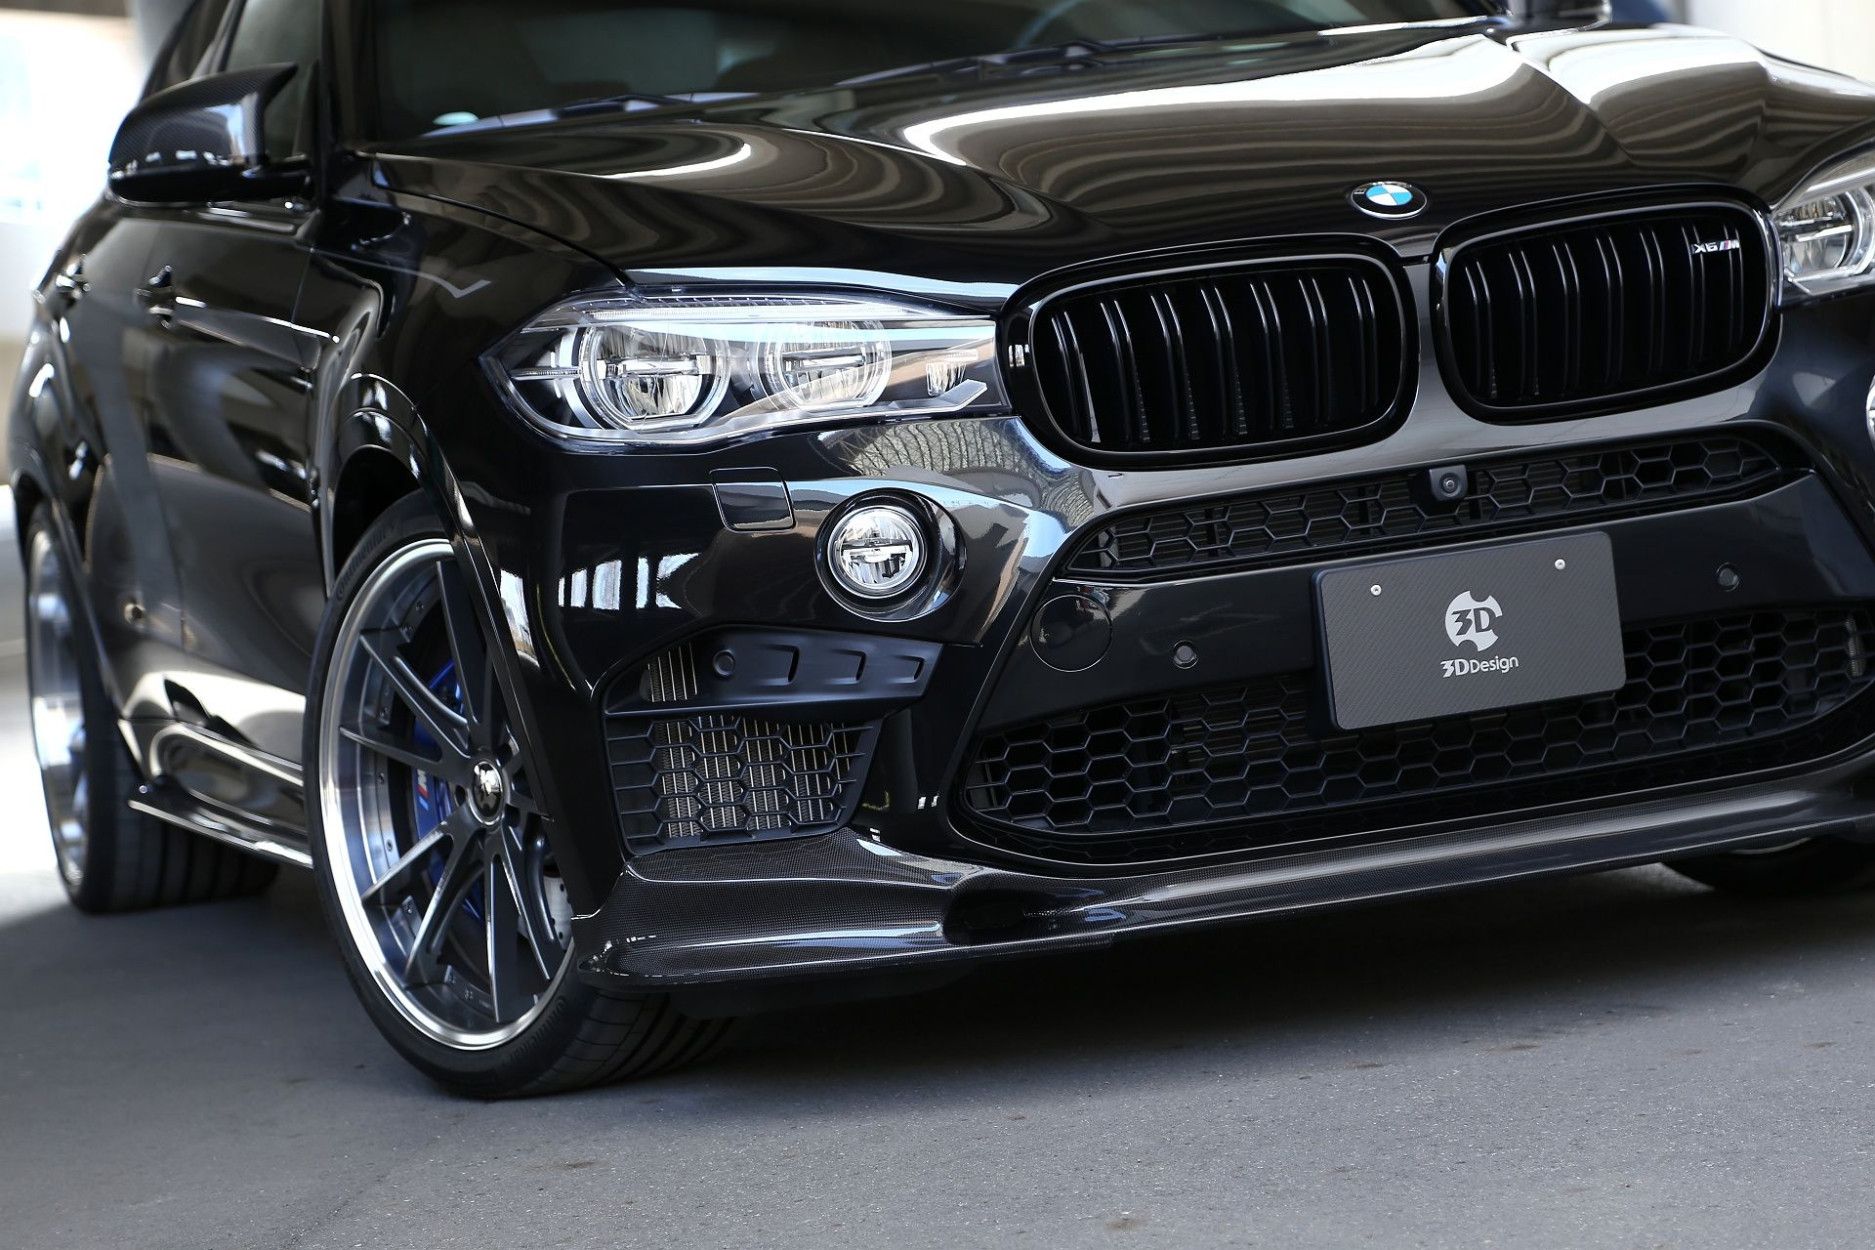 3DDesign carbon front lip fitting for BMW F86 X6M